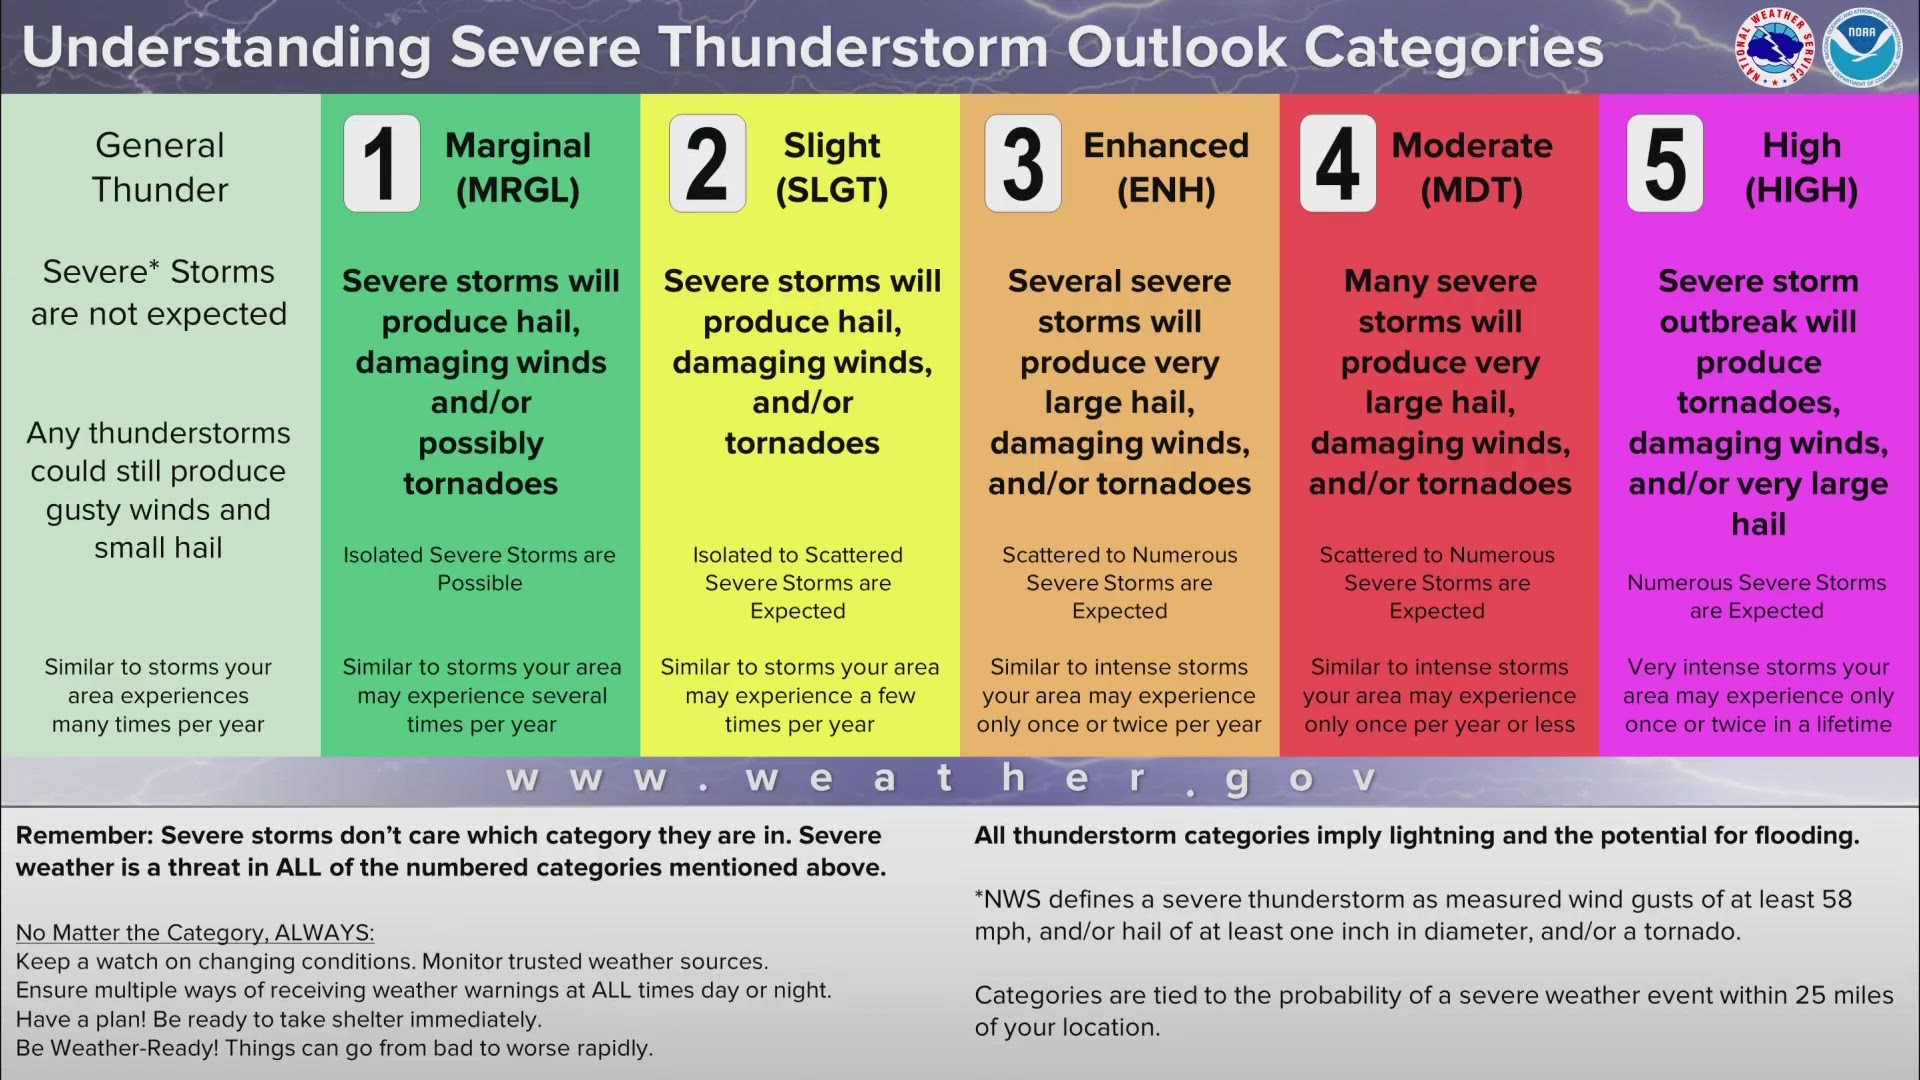 Knowing the risk level of severe weather events could maybe even save your life.